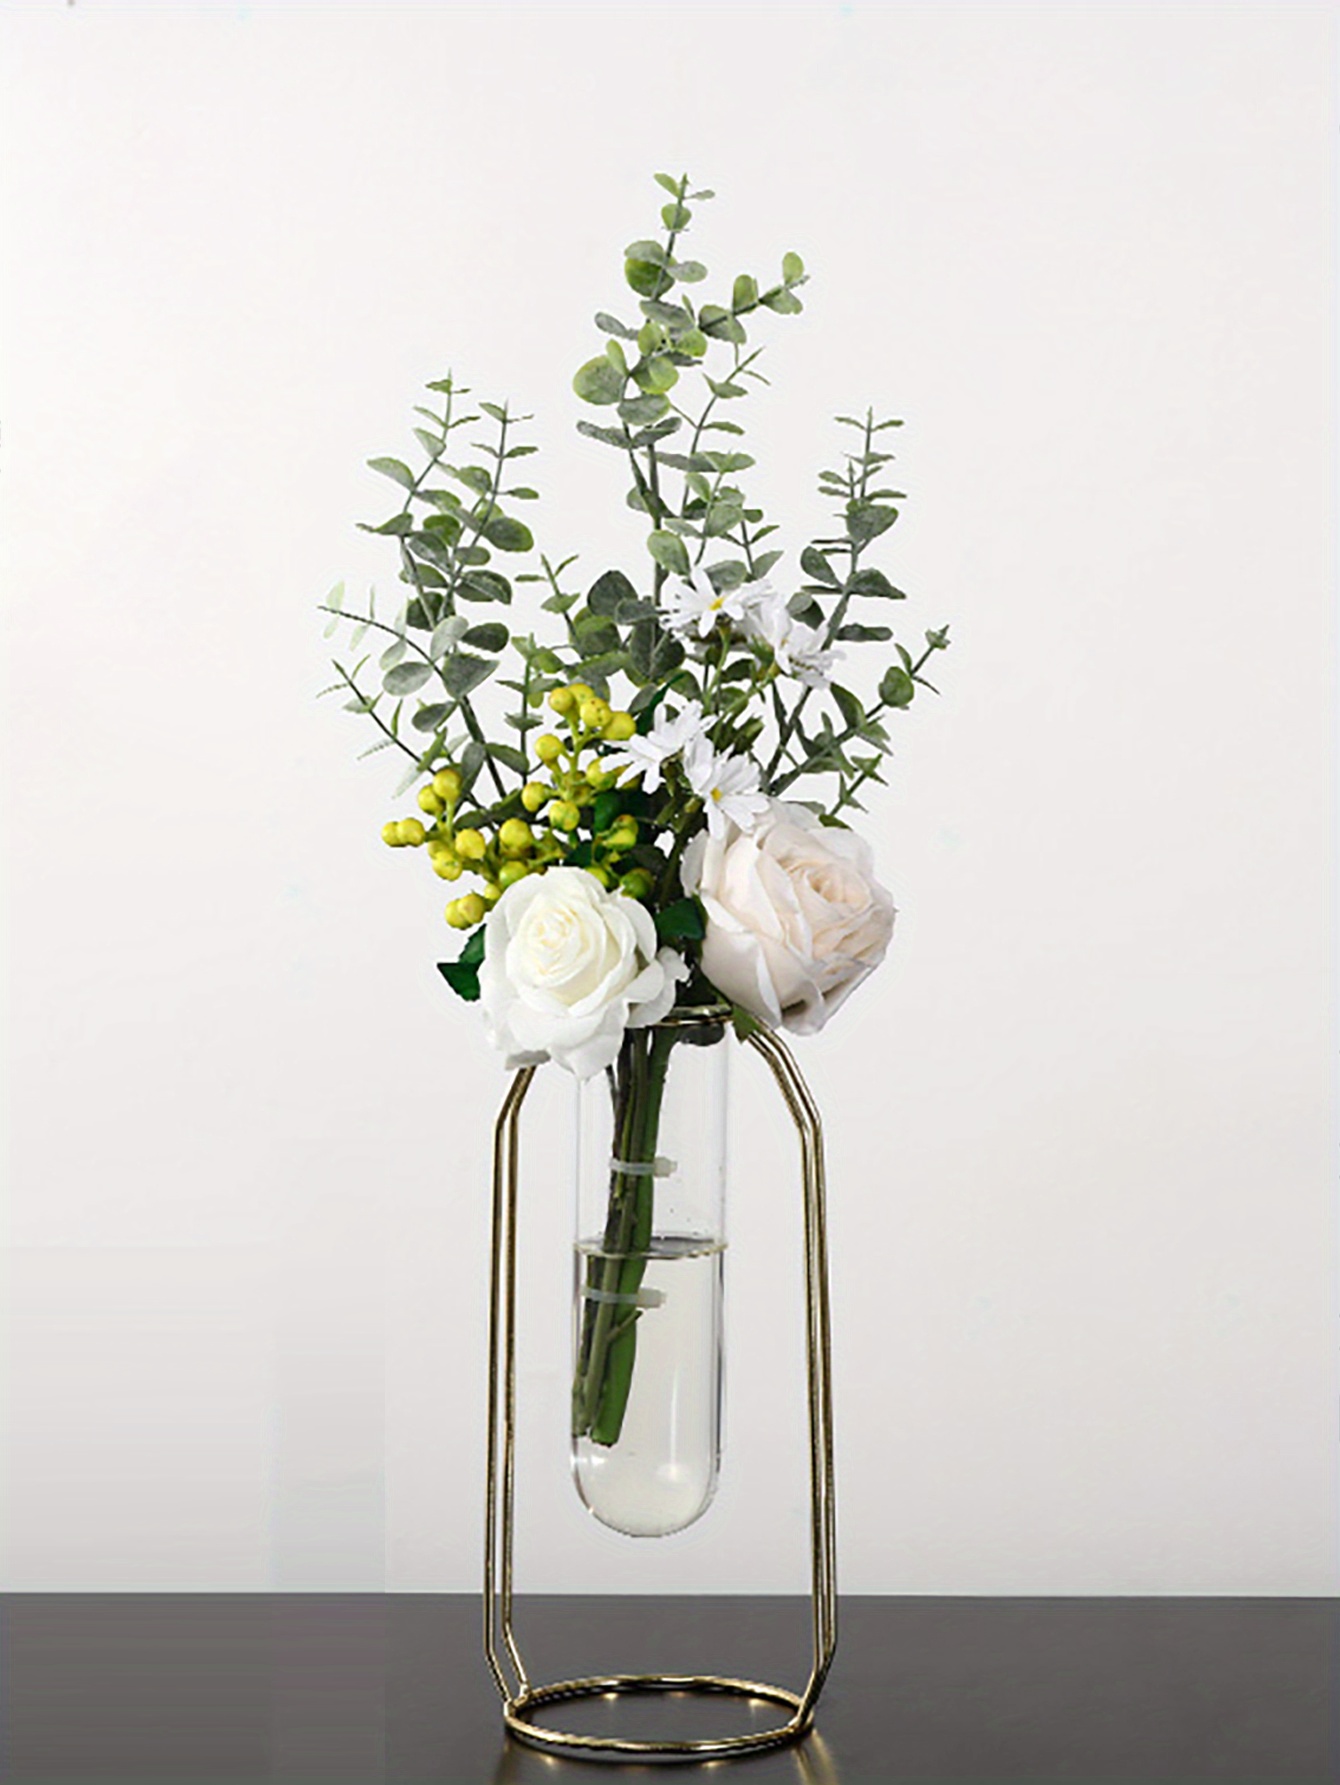 Glasseam Glass Vase for Flowers Gold, Modern Small Vases for Pampas Grass with Geometric Metal Rack for Artificial Flowers Living Room Dining Table